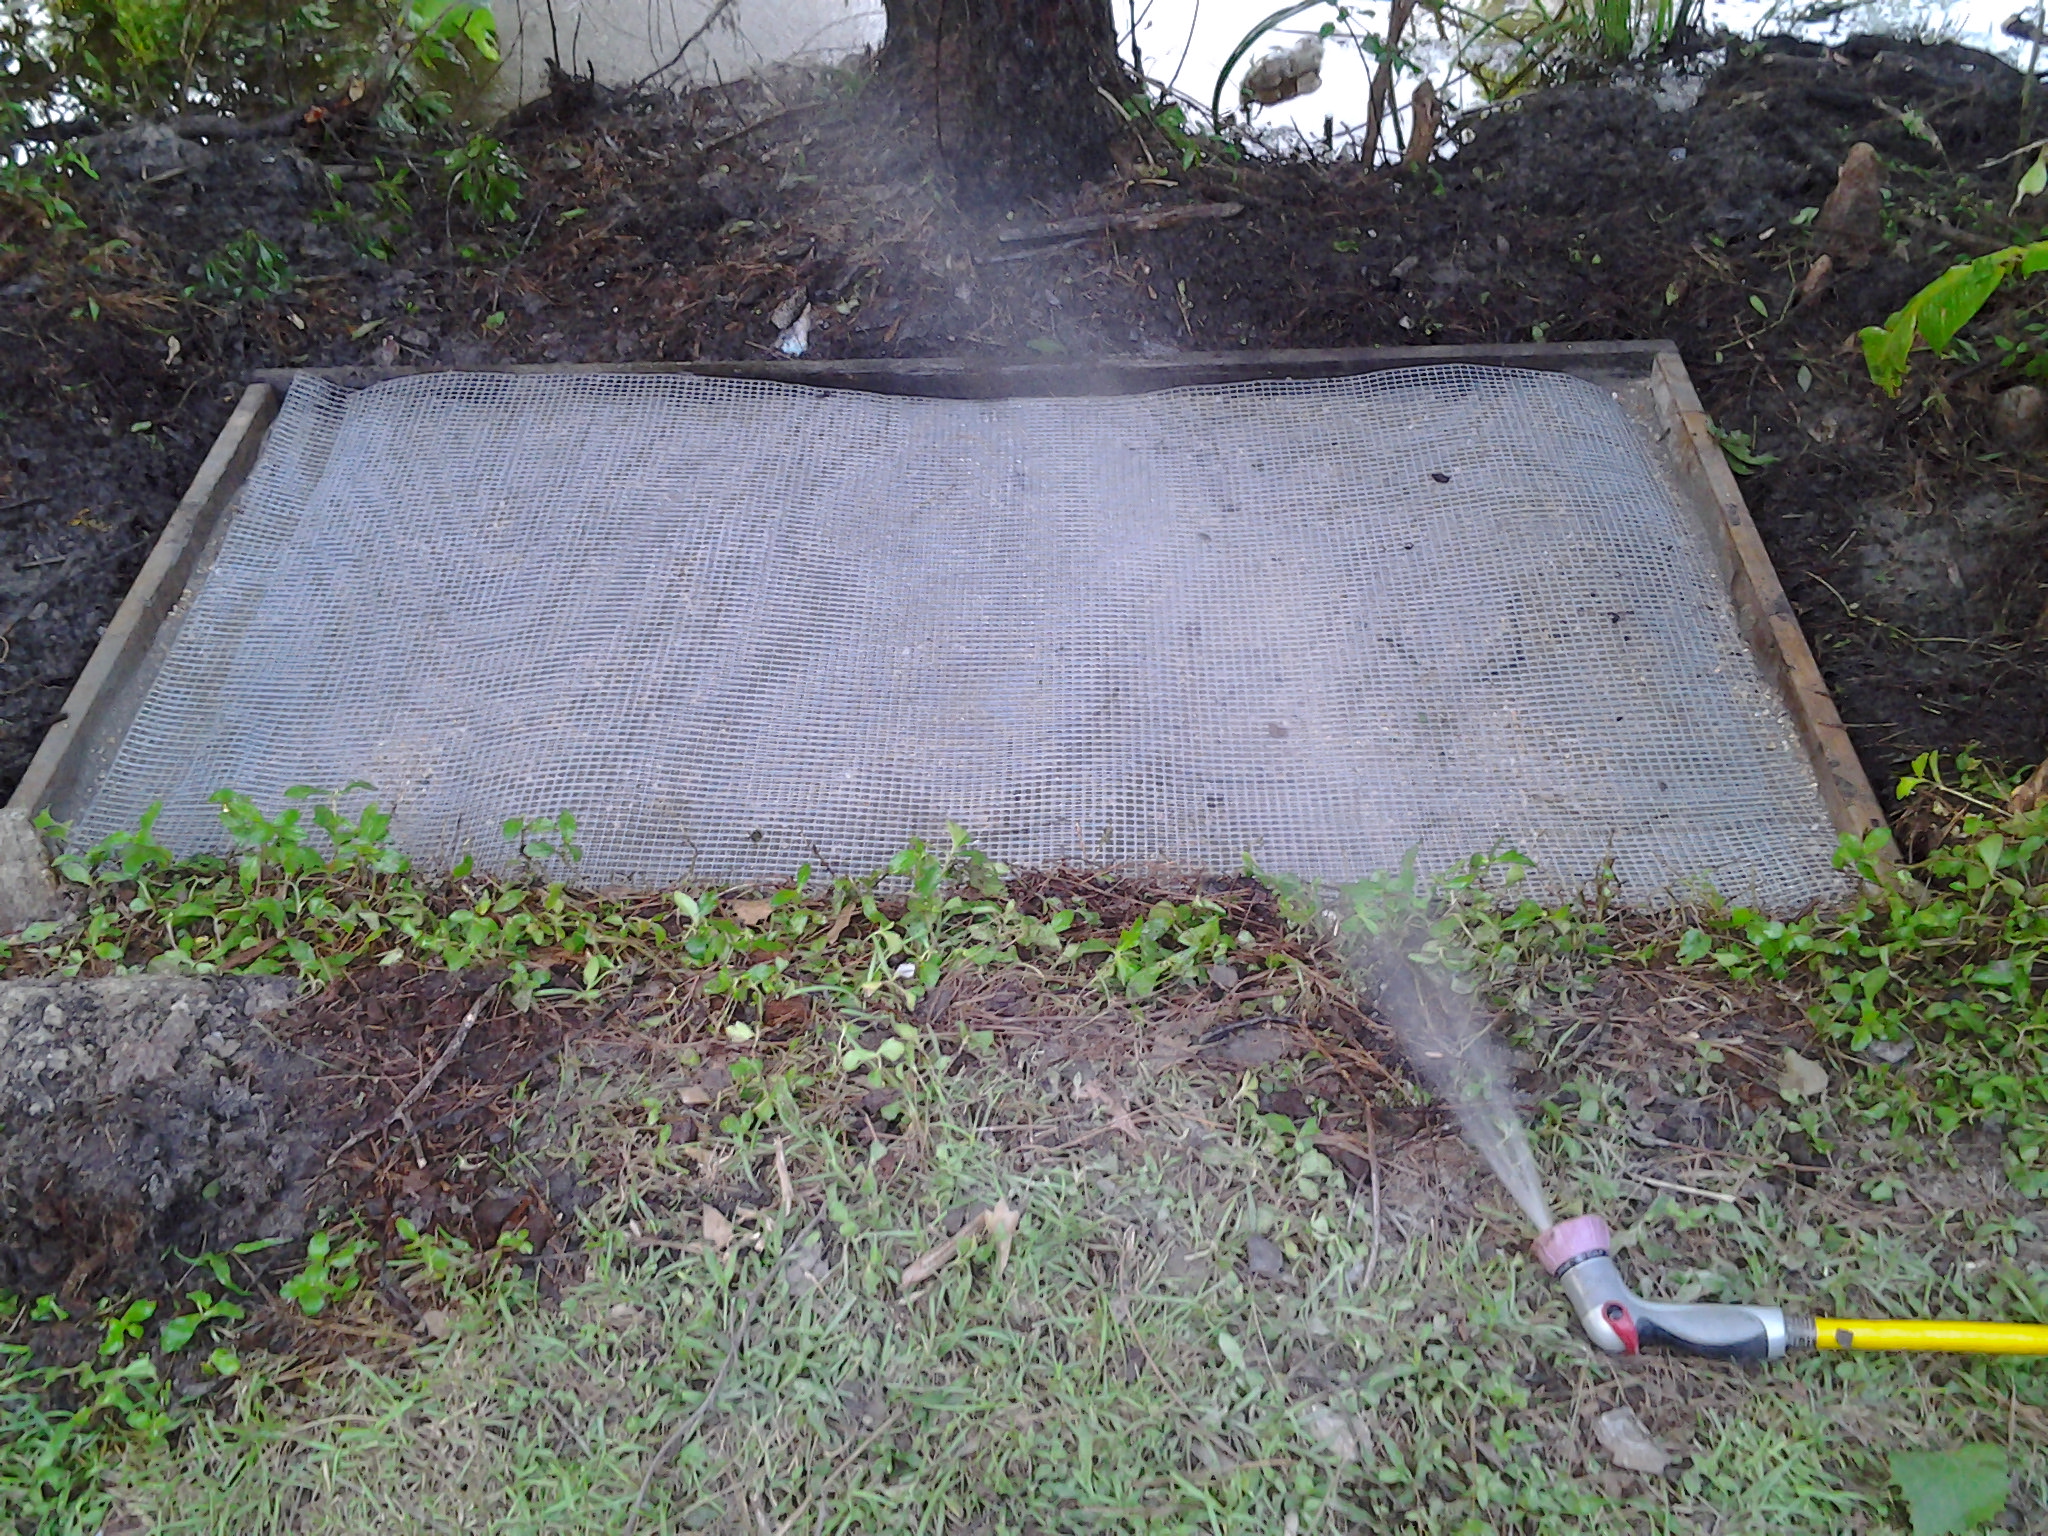 Watering the concrete